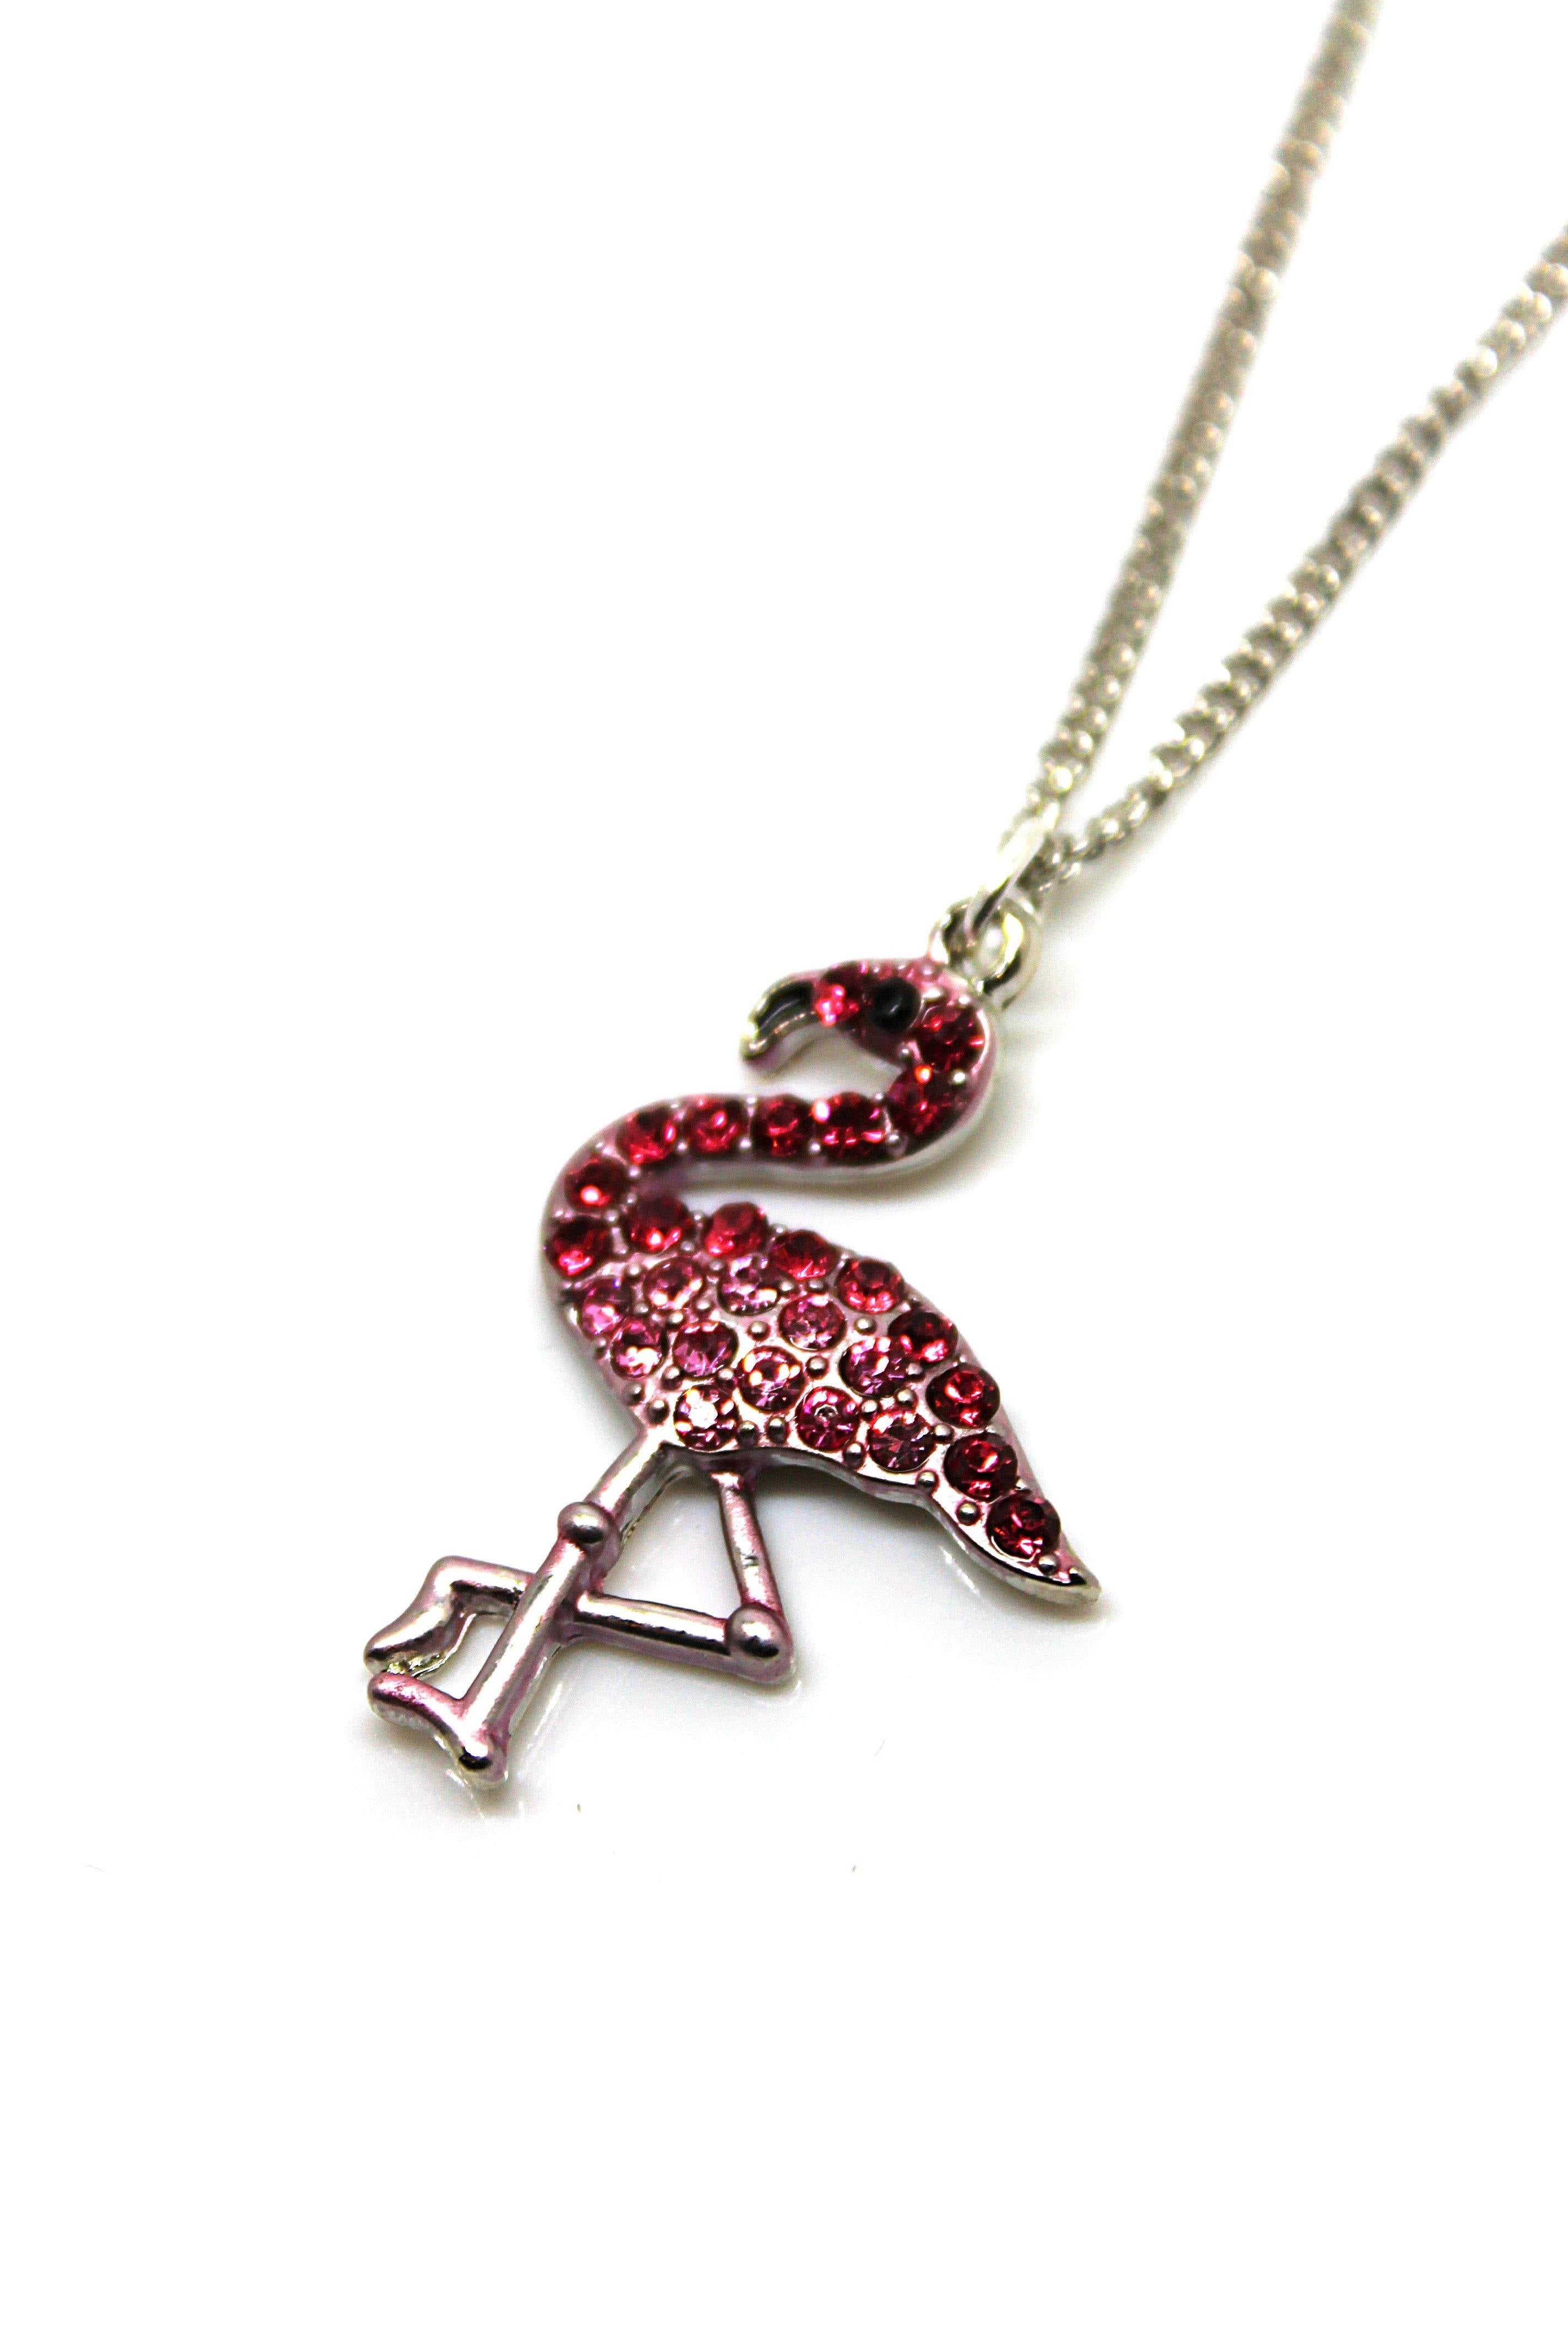 Flamingo Large Necklace - Wildtouch - Wildtouch